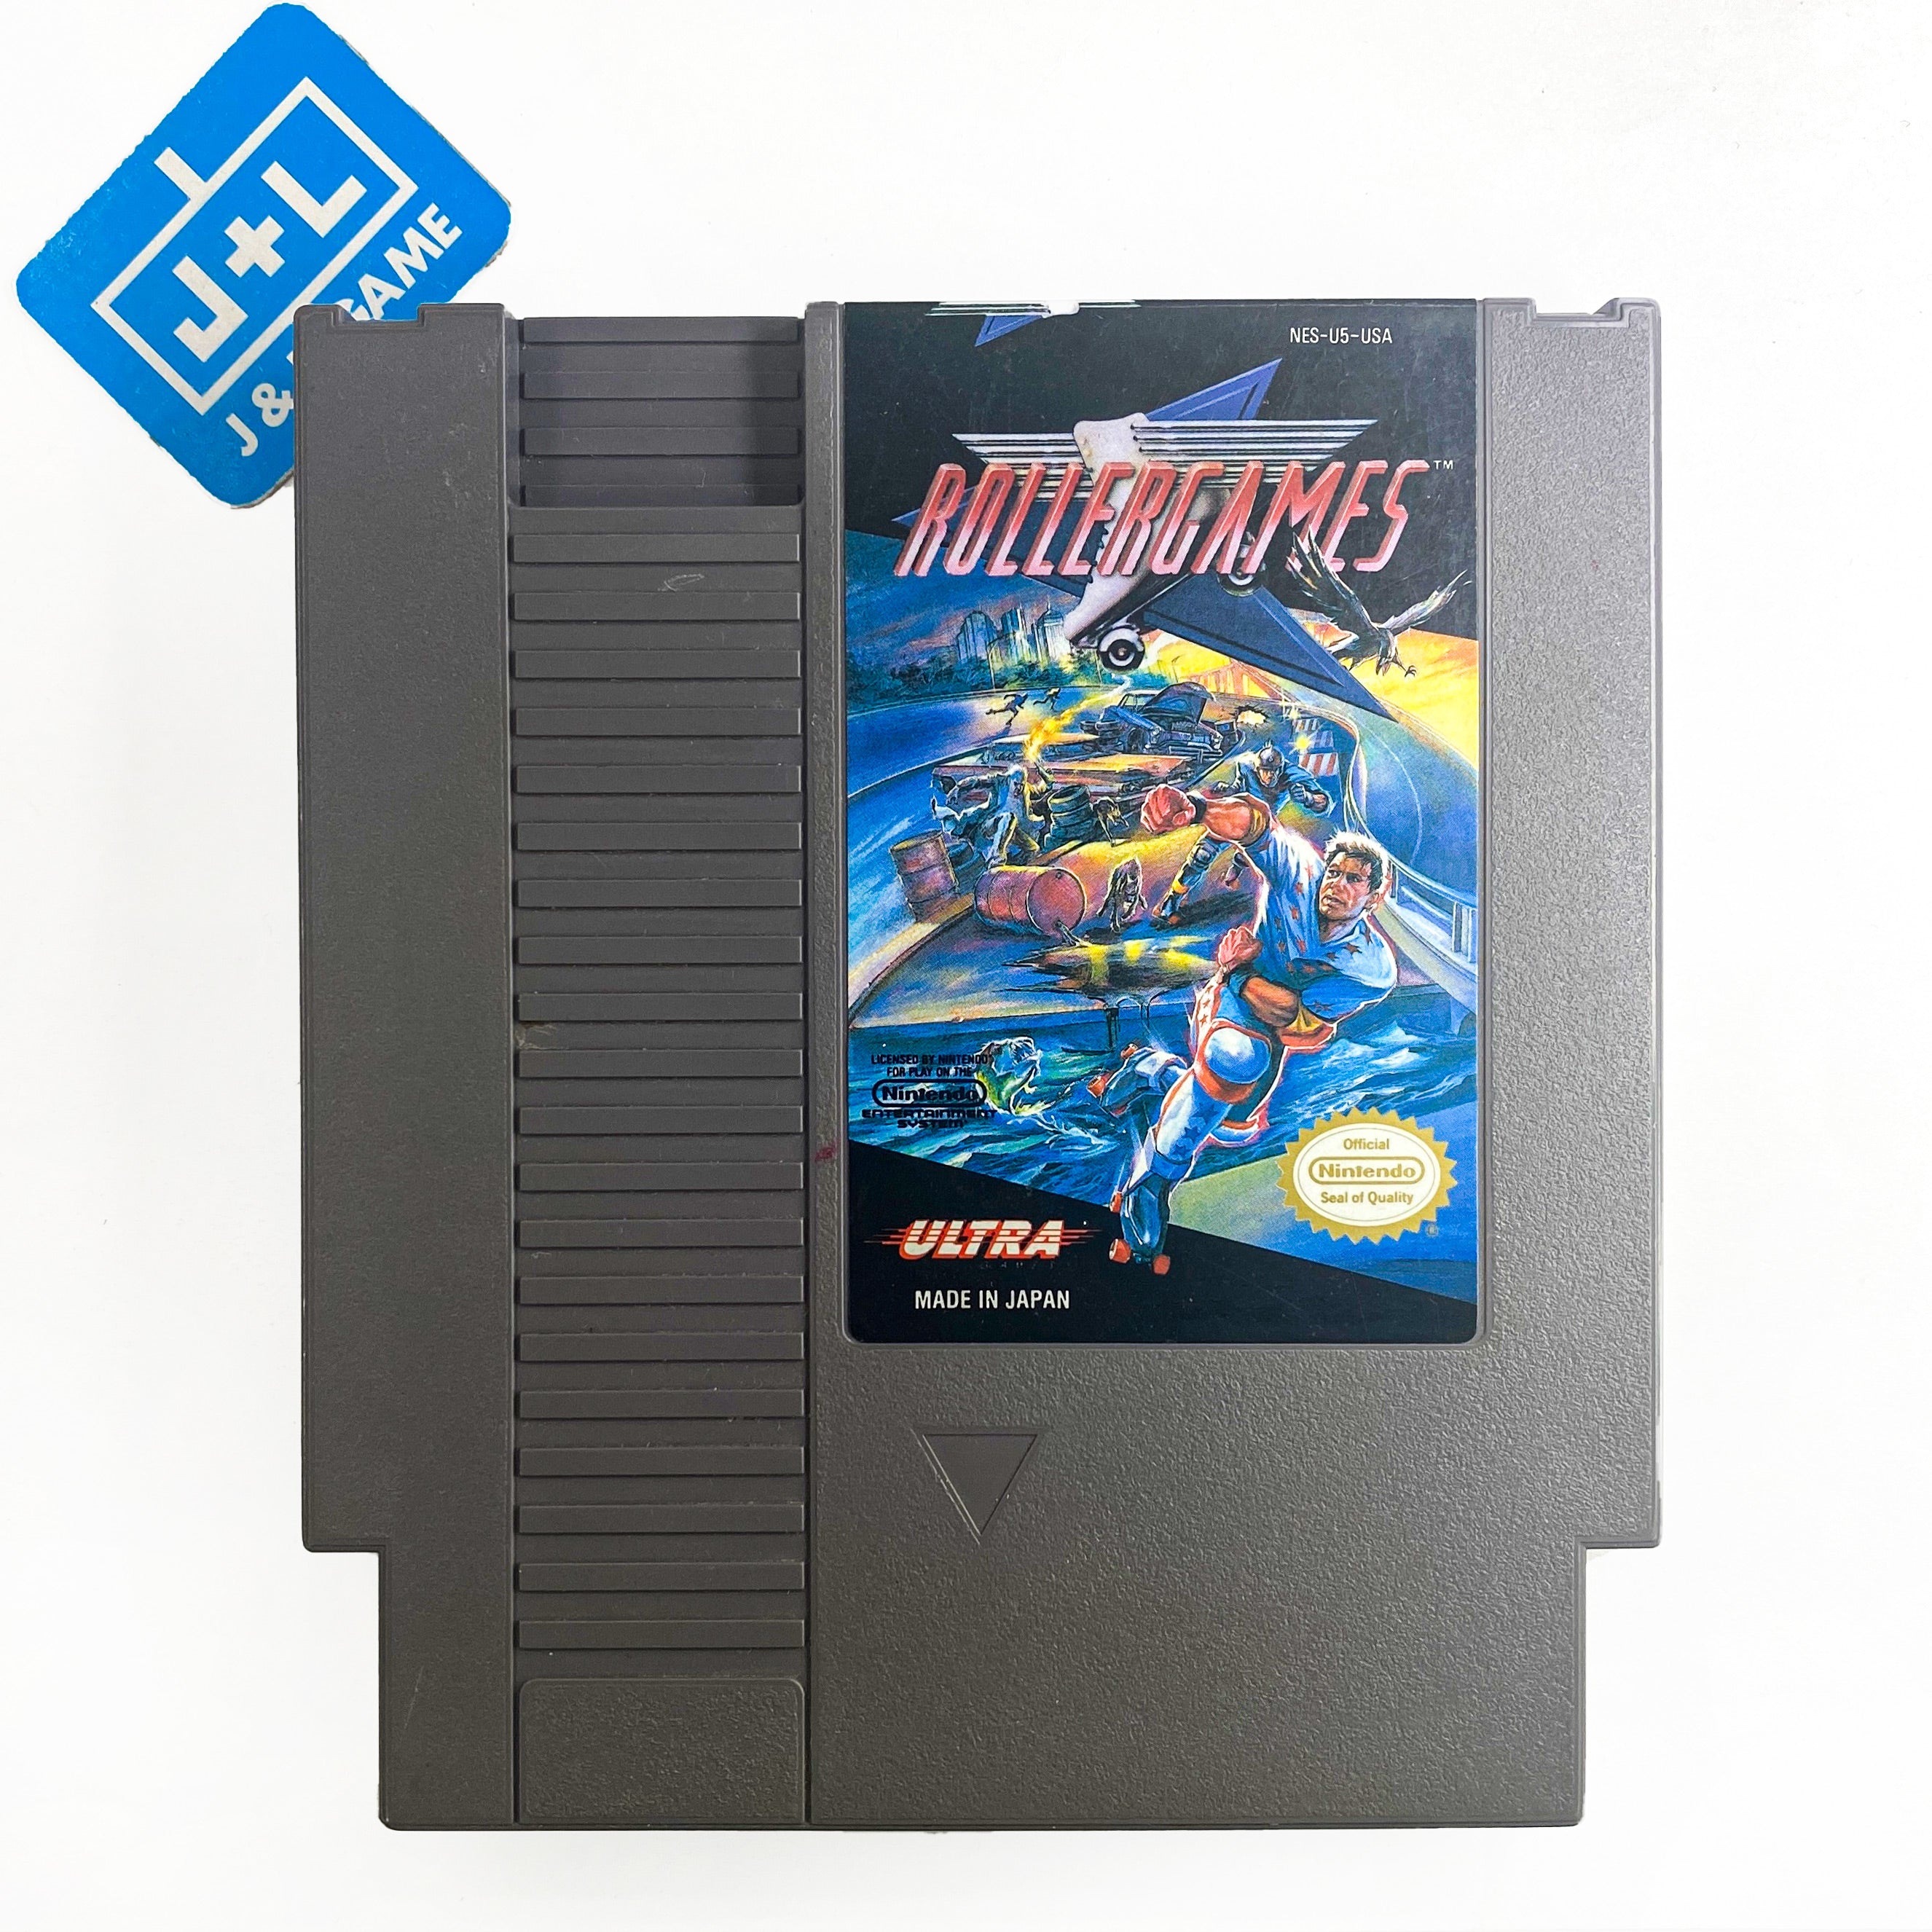 Rollergames - (NES) Nintendo Entertainment System [Pre-Owned] Video Games Ultra   